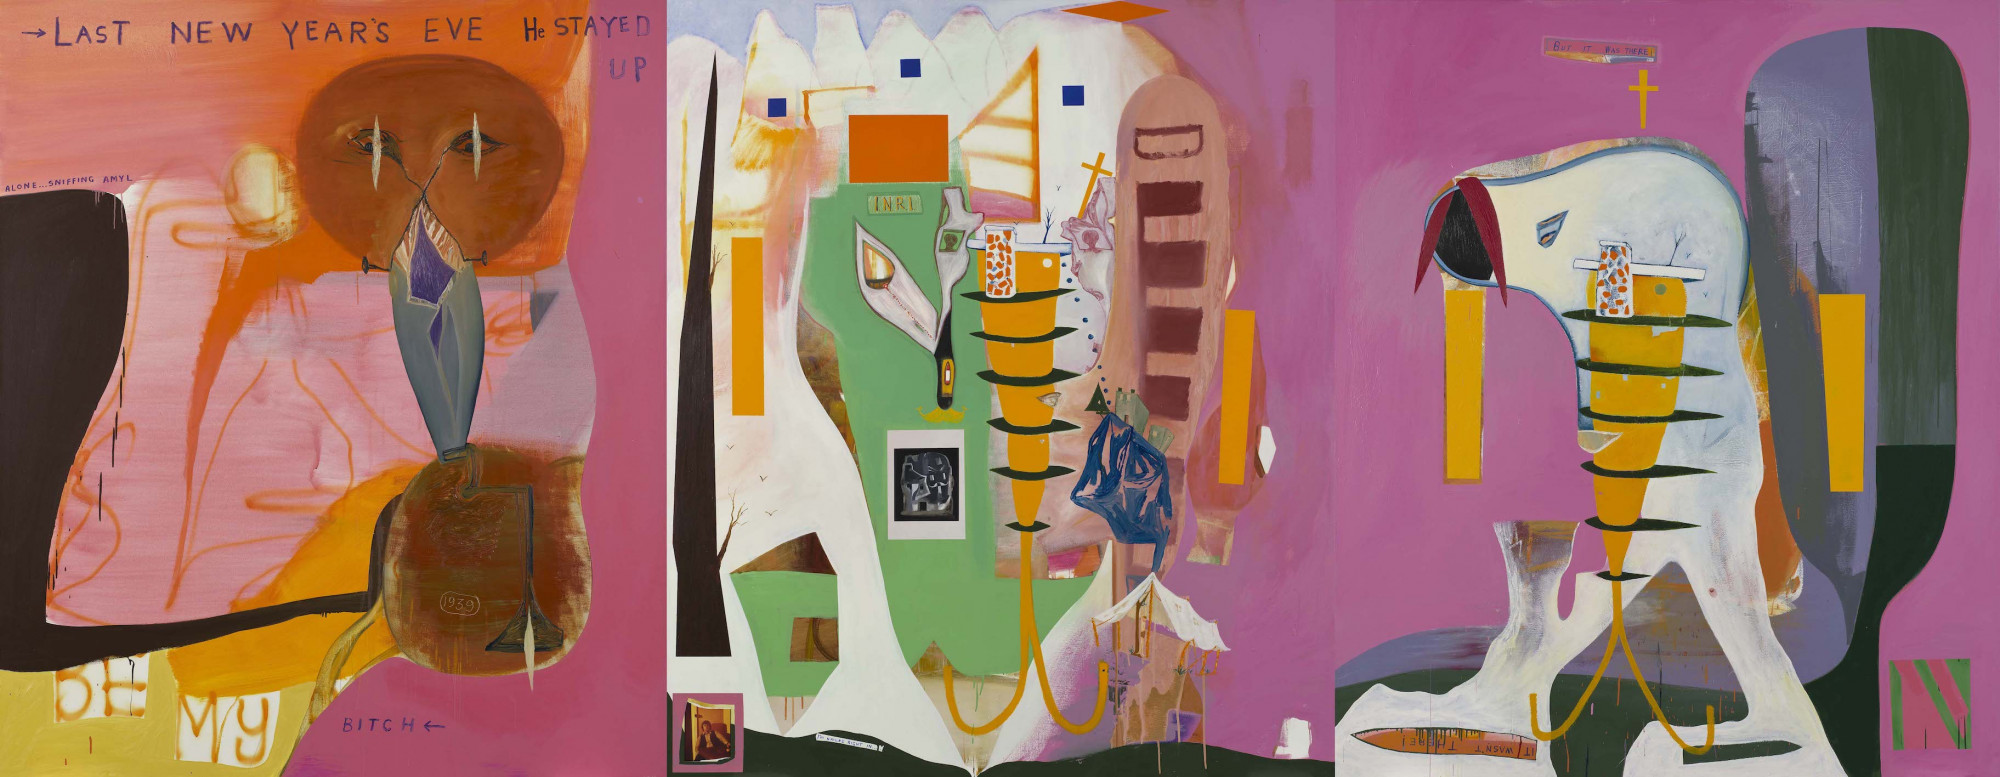 Gareth Sansom, <em>Sweeney Agonistes</em>, 2005, oil, enamel and collage on linen, triptych: 213 x 549cm (overall), collection: Queensland Art Gallery | Gallery of Modern Art. The James C. Sourris AM Collection. Gift of James C. Sourris AM through the Queensland Art Gallery Foundation 2012, donated through the Australian Government’s Cultural Gifts Program.